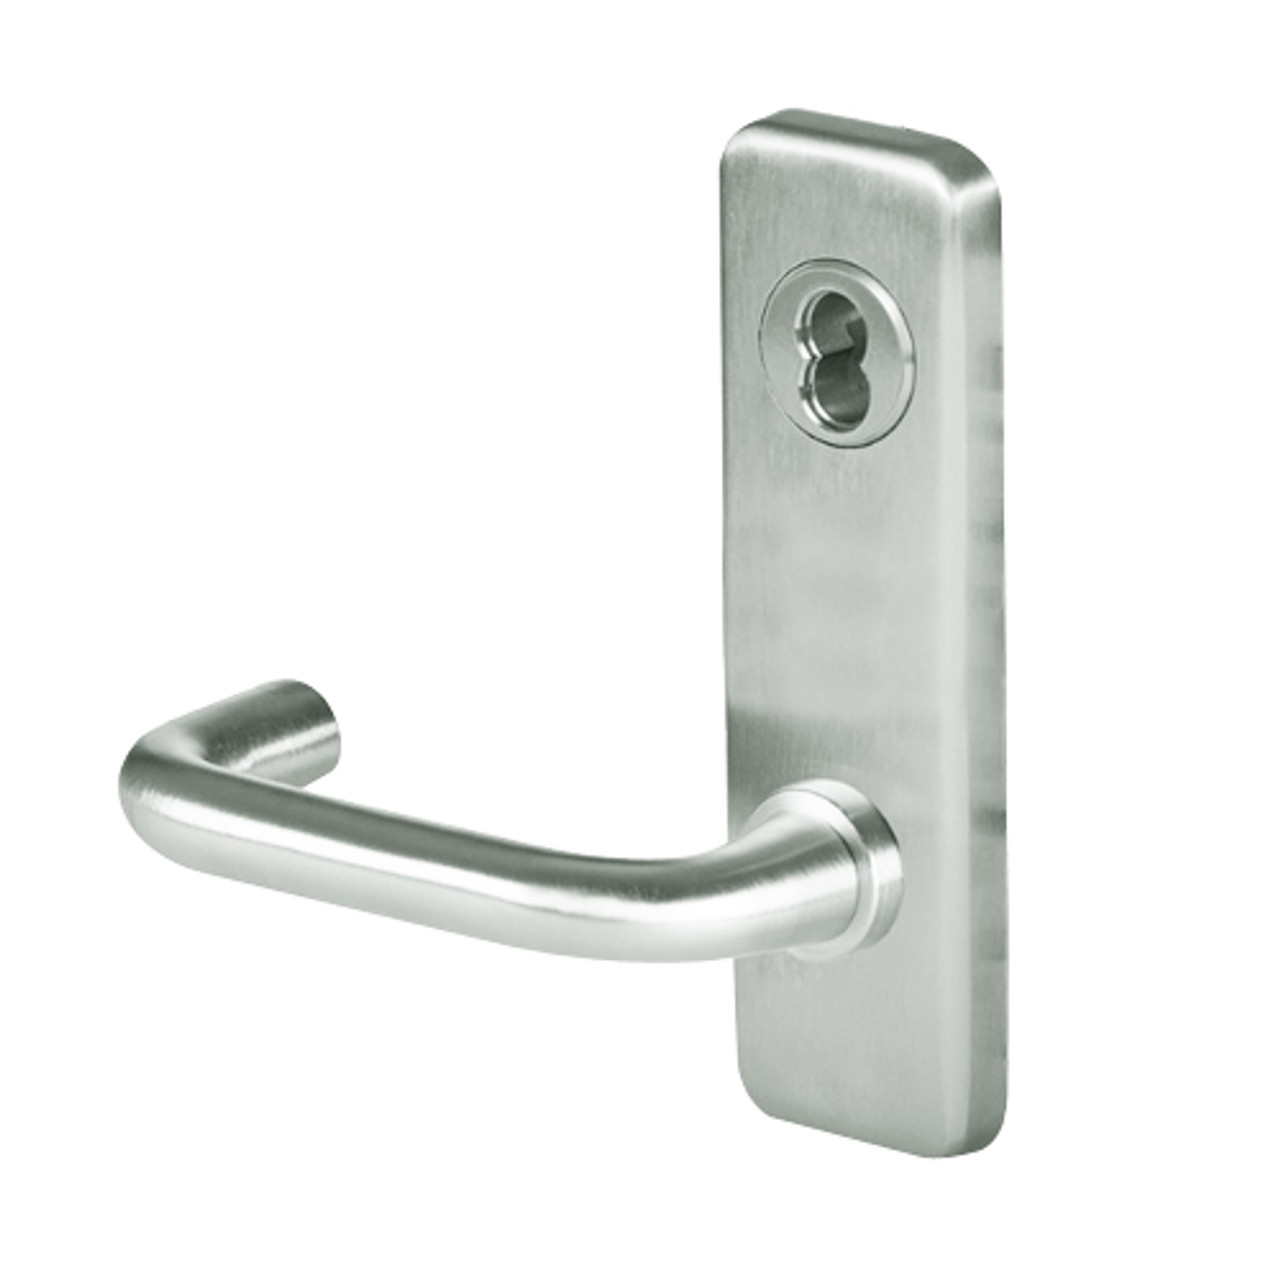 45H7B3J618 Best 40H Series Entrance with Deadbolt Heavy Duty Mortise Lever Lock with Solid Tube Return Style in Bright Nickel